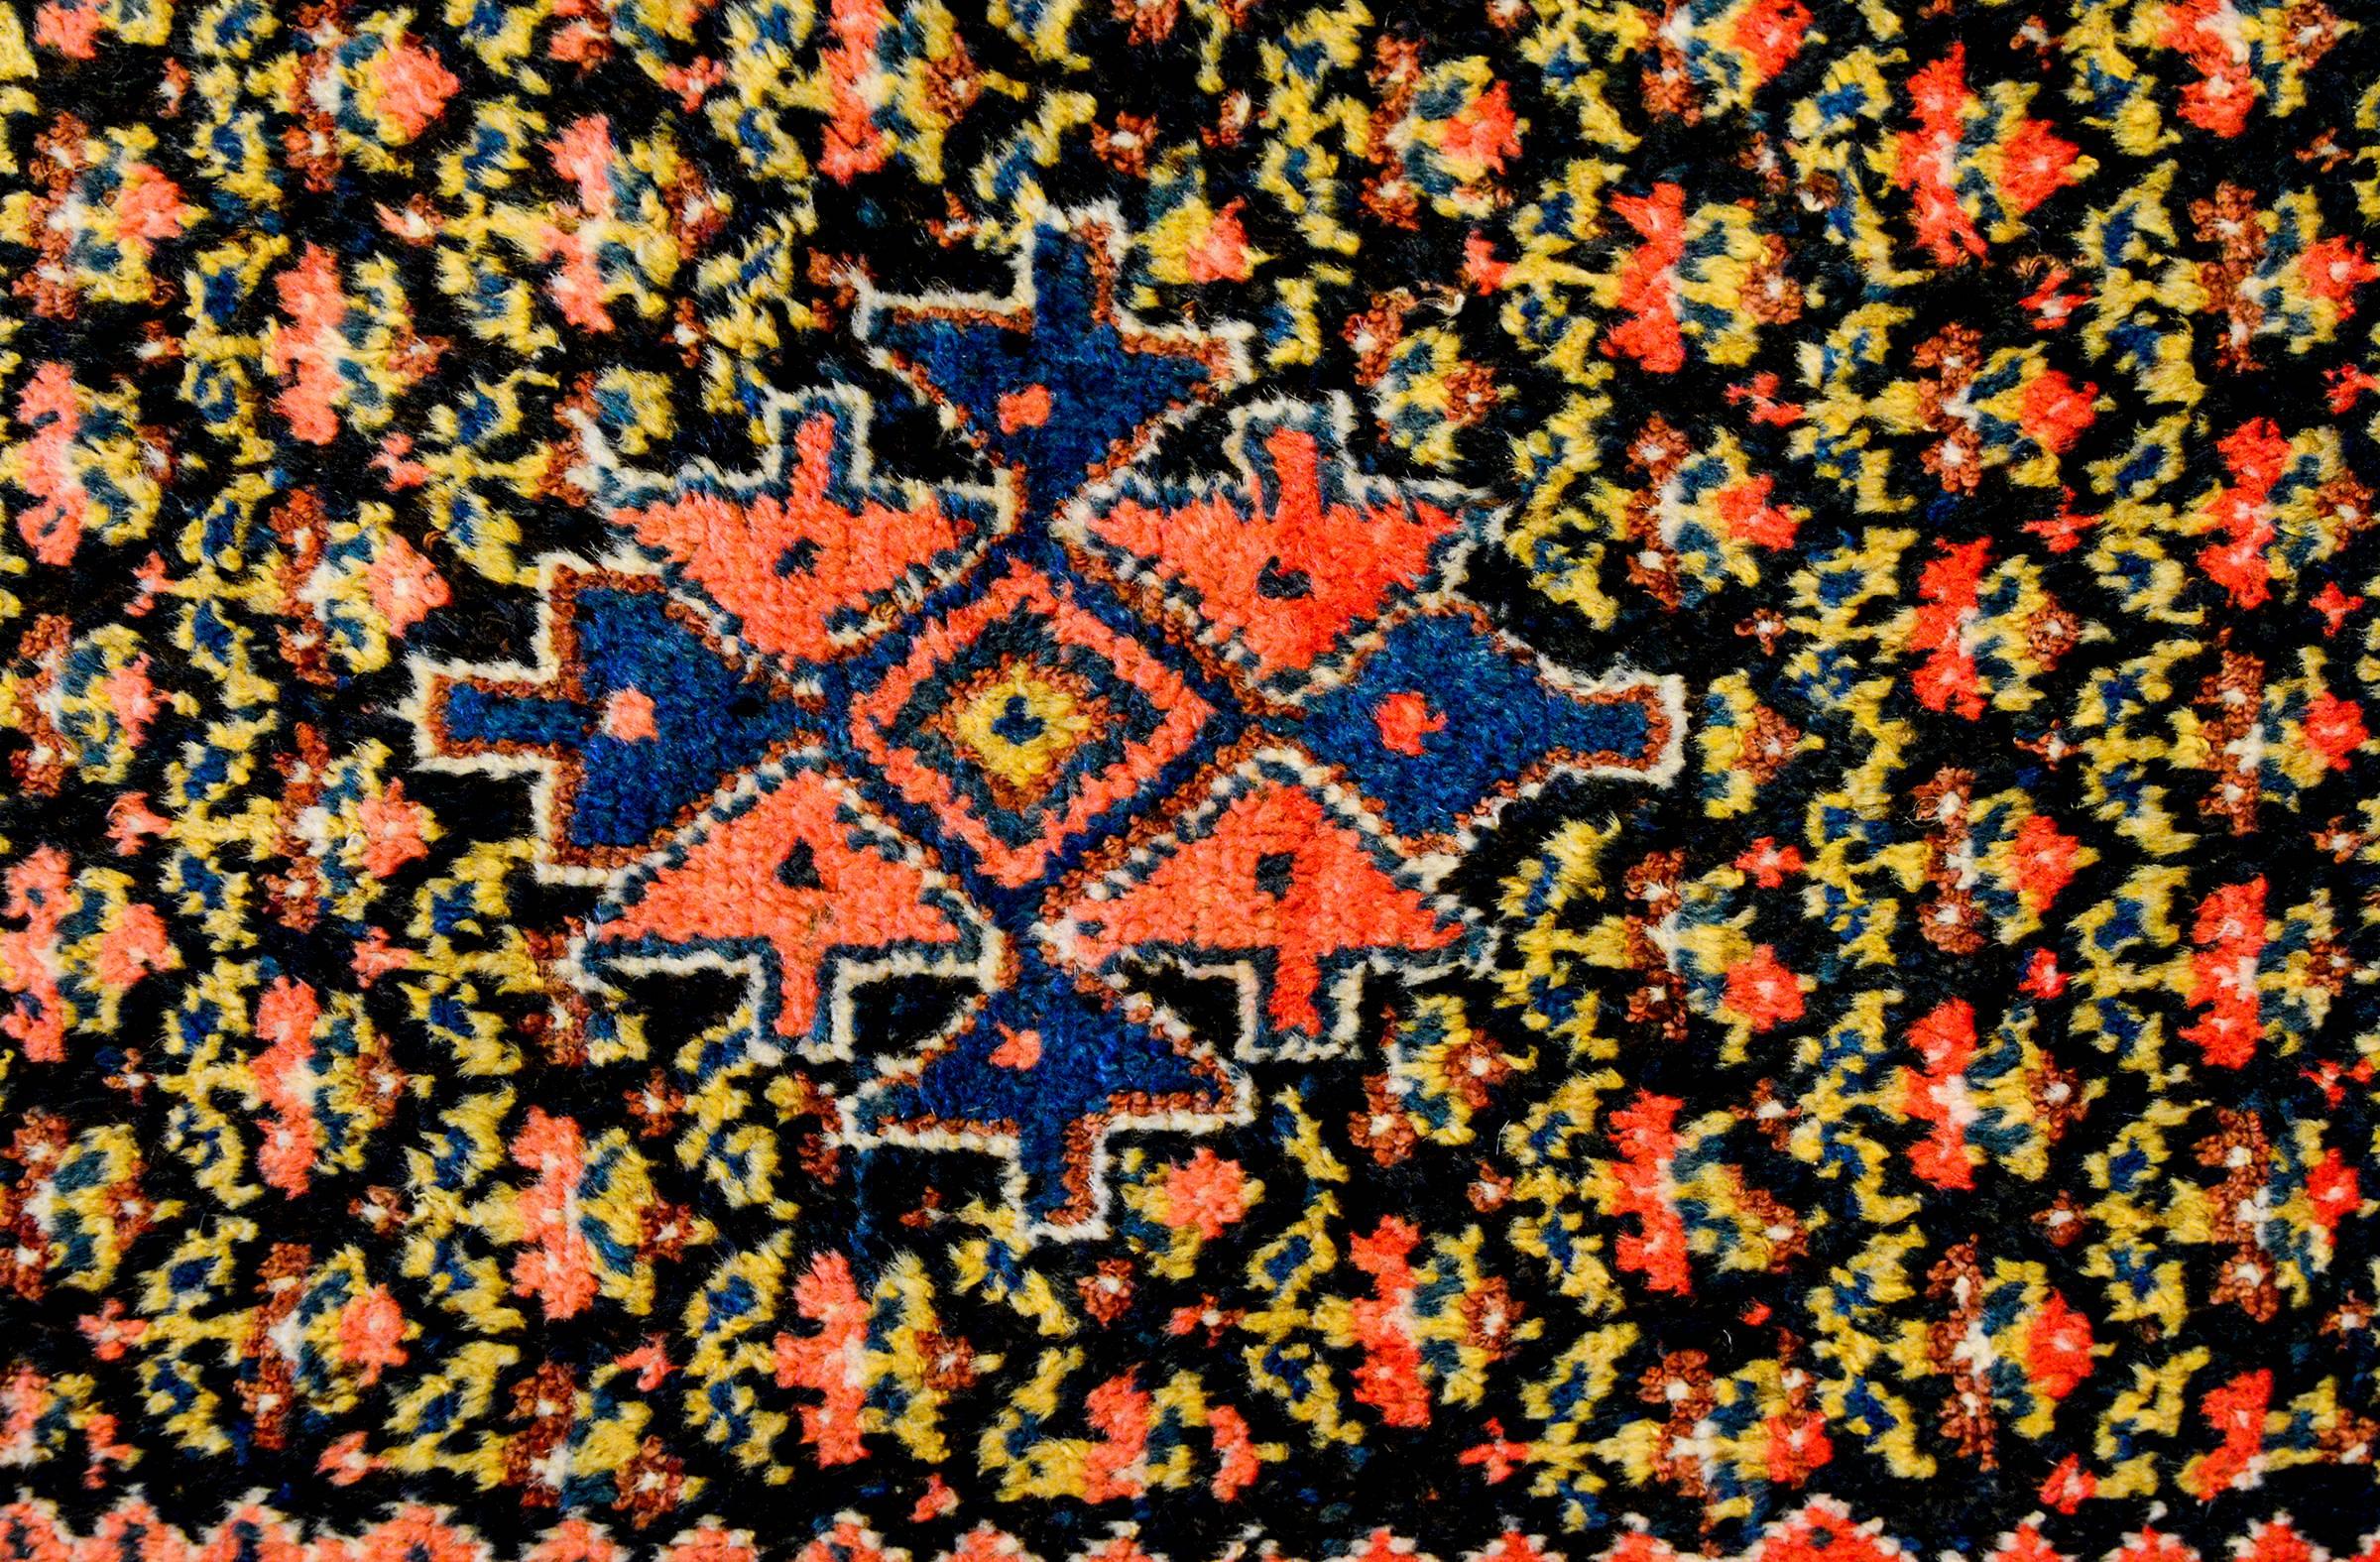 An early 20th century Persian Turkmen rug with a beautiful multi-colors petite floral patterned background, with a central crimson and indigo medallion composed of eight arrows. The border is complex, composed of seven distinct patterns, two with a